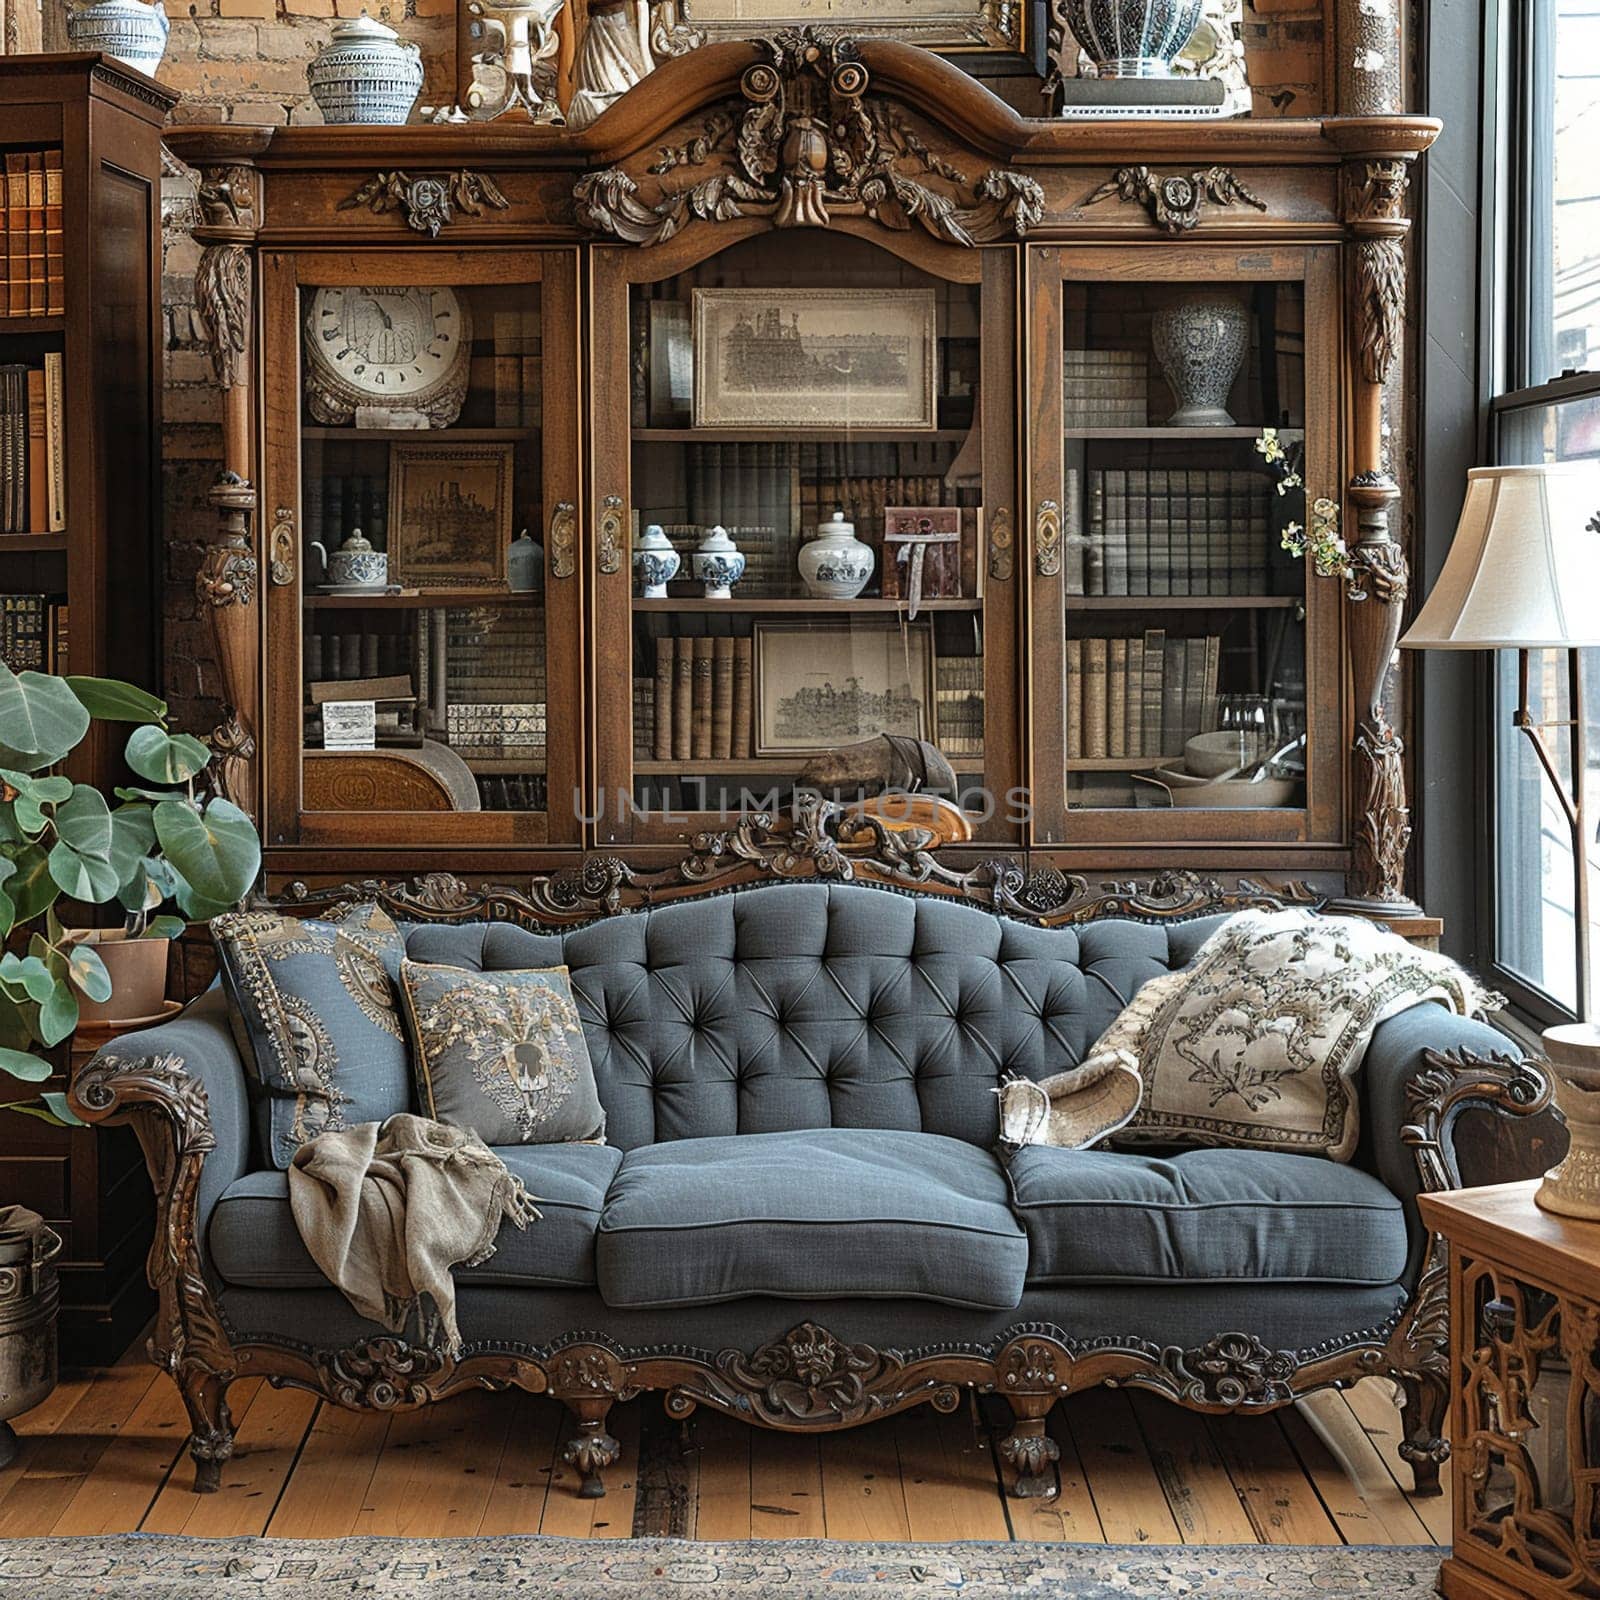 Curated Antique Gallery Recounts Historical Tales in Business of Collectible Treasures and Vintage Finds, Curio cabinets and antique lamps recount historical tales and collectible treasures in the curated antique gallery business.